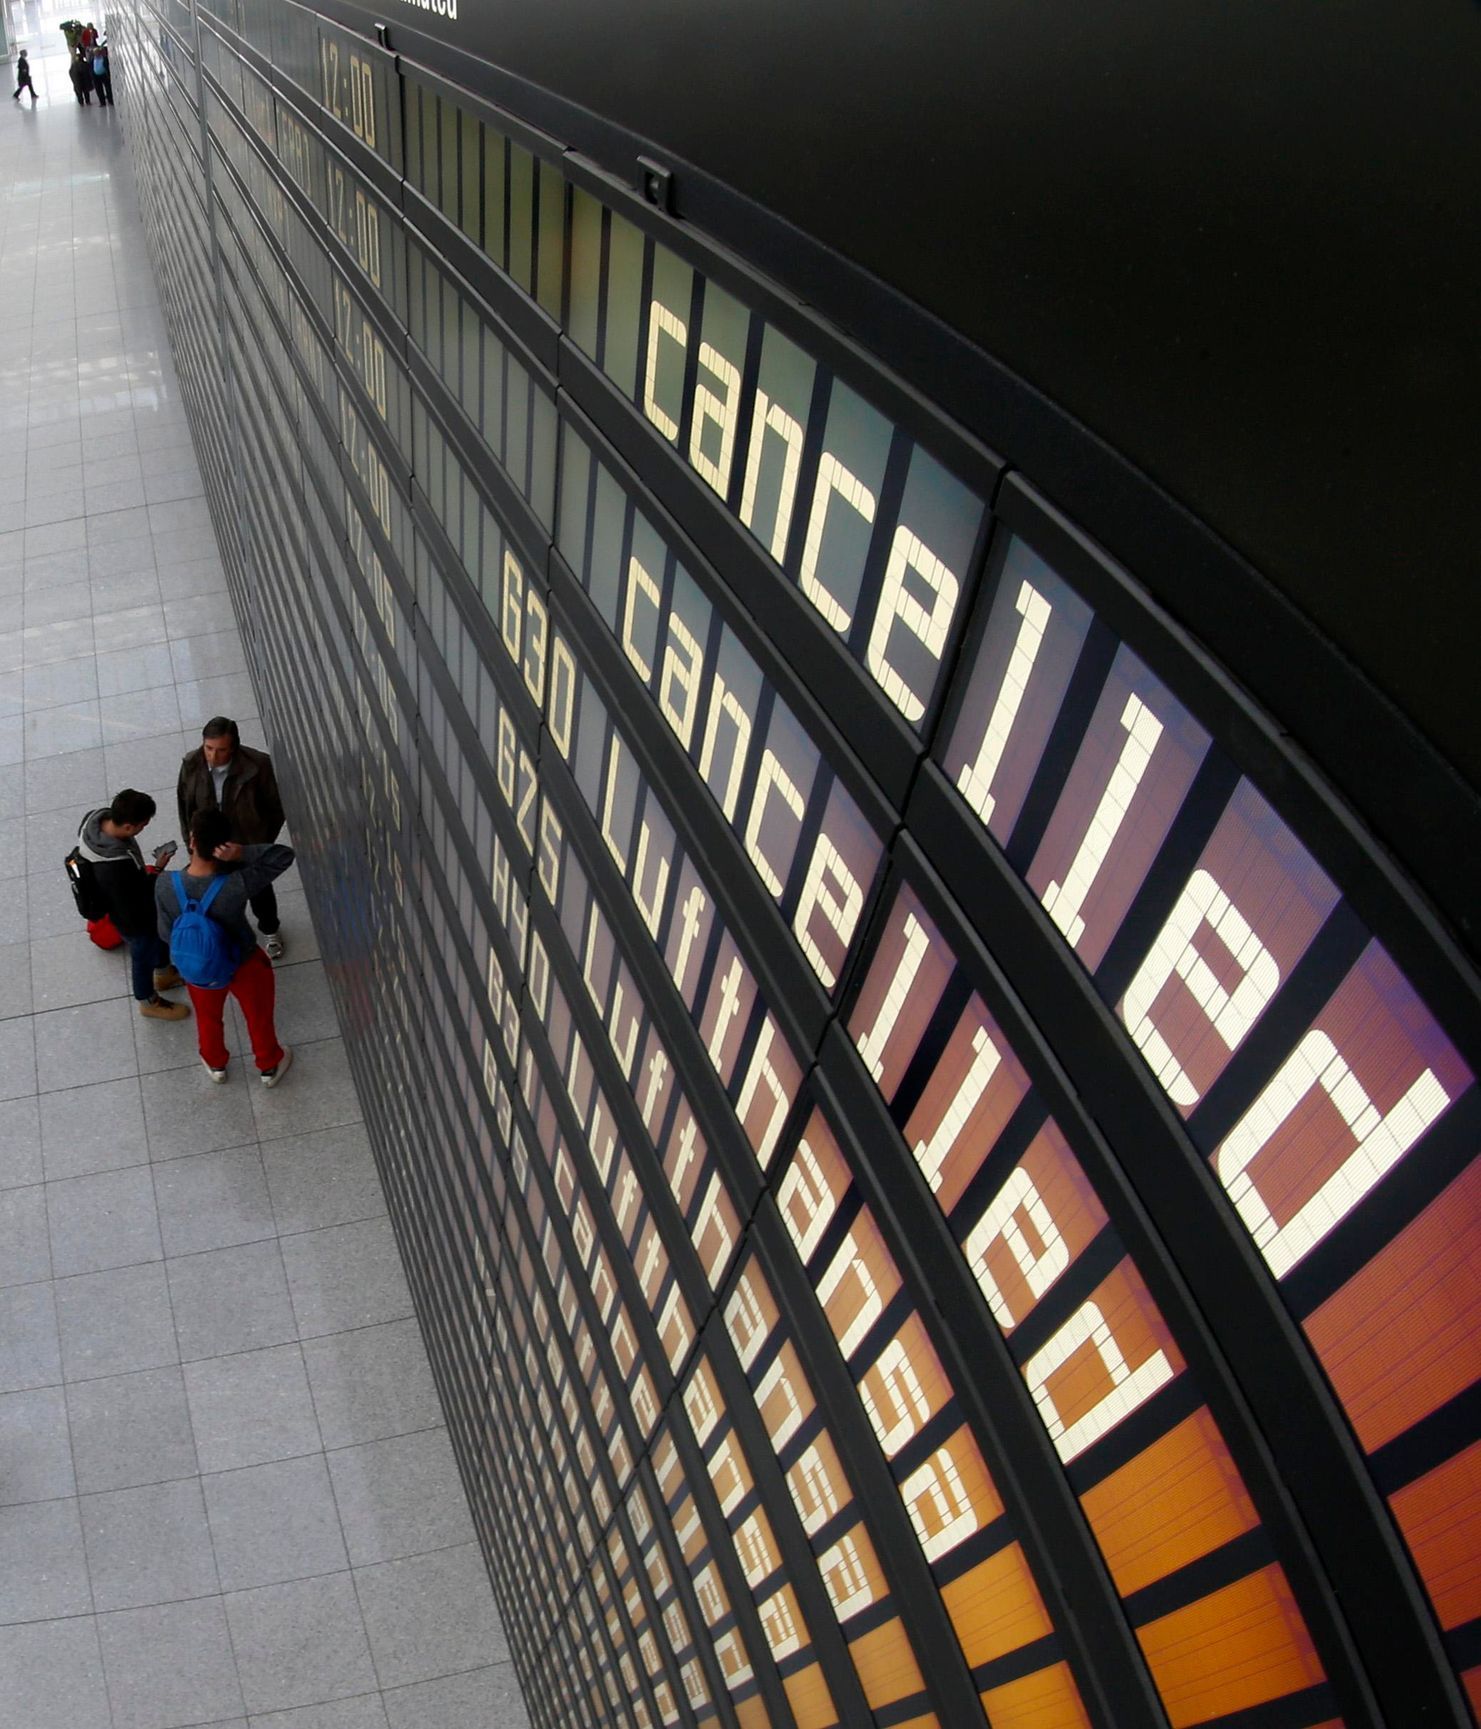 Cancelled flights by German air carrier Lufthansa are pictured on flight schedule board at Munich's airport